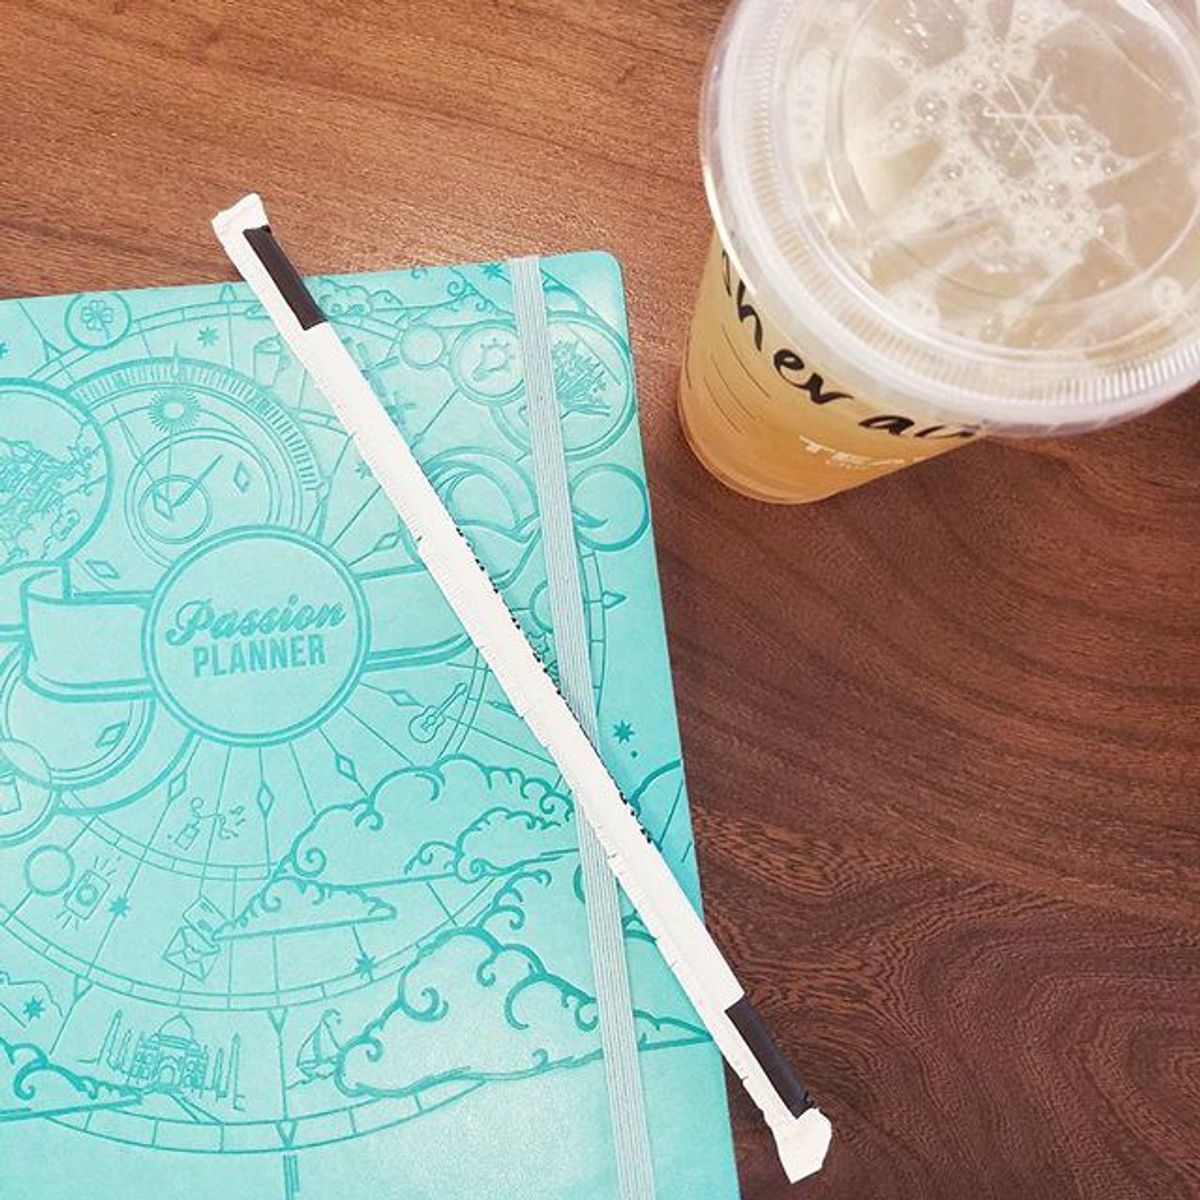 10 Signs You Need A Passion Planner